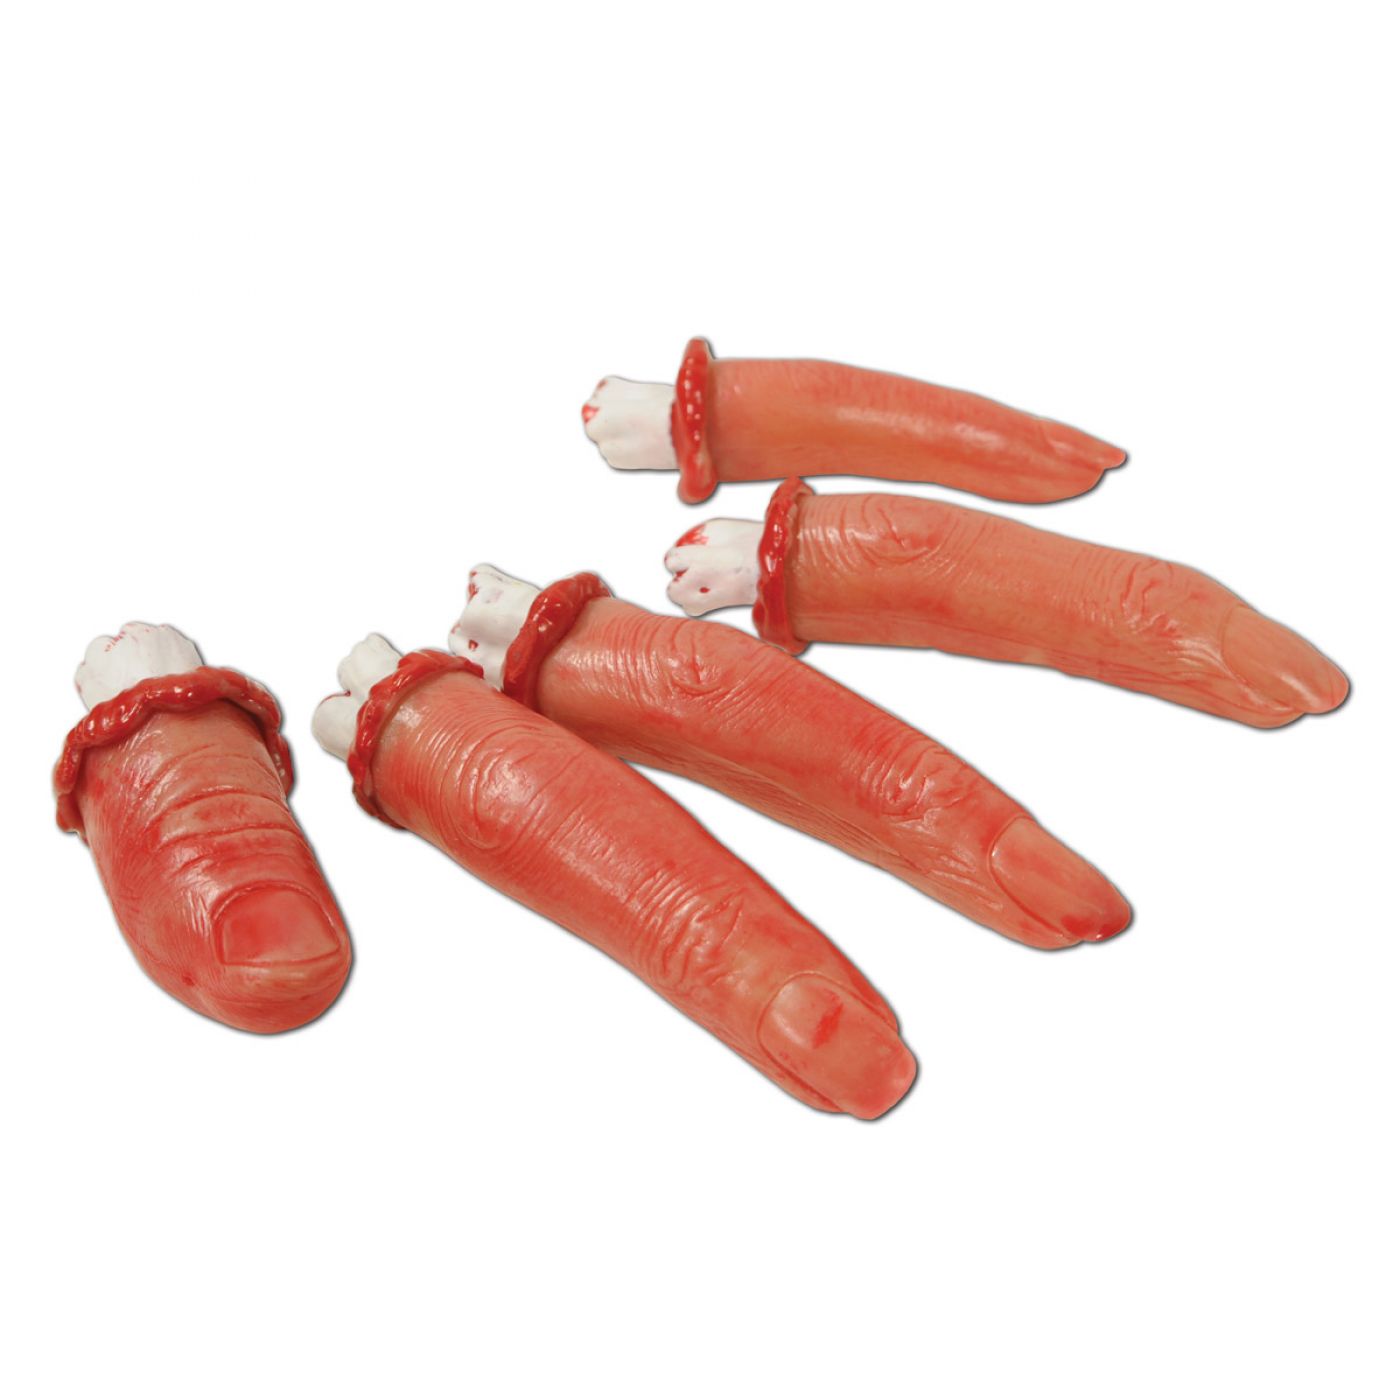 Bloody Fingers image